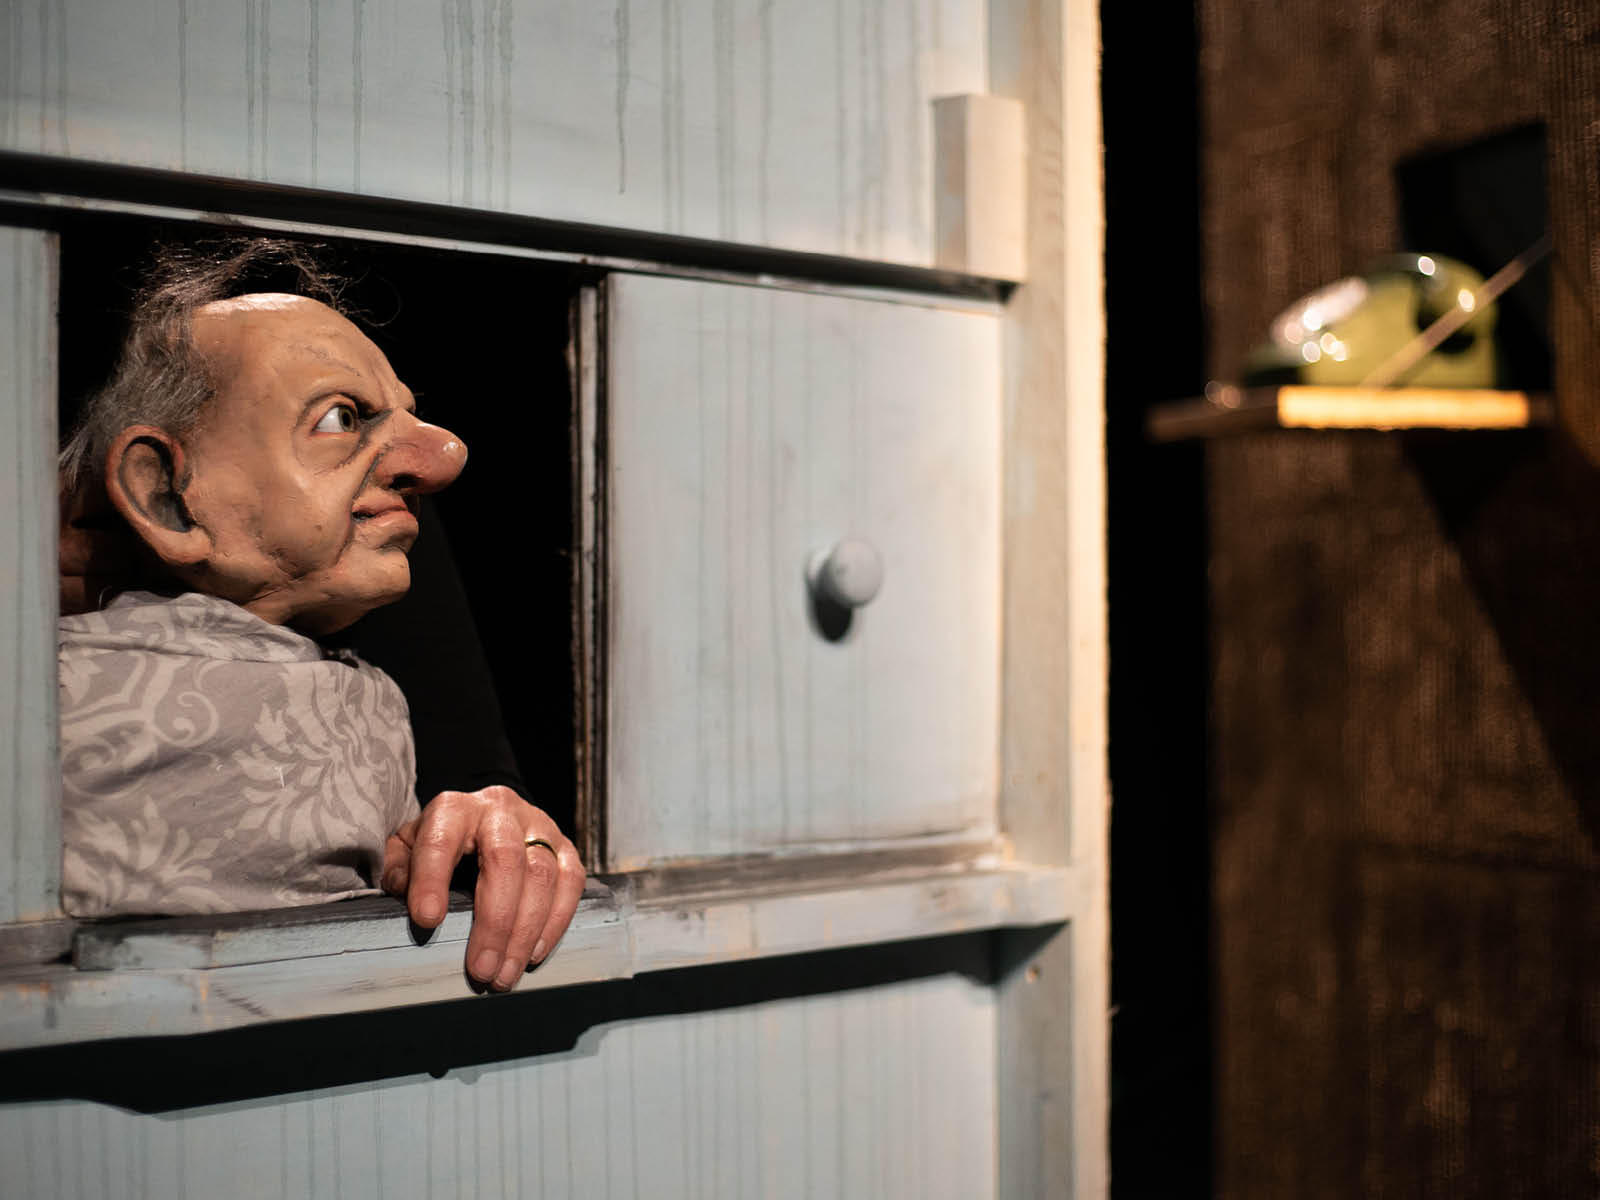 The doll of an old man with a half bald head looks out of a window. An old green telephone can be seen in the background.